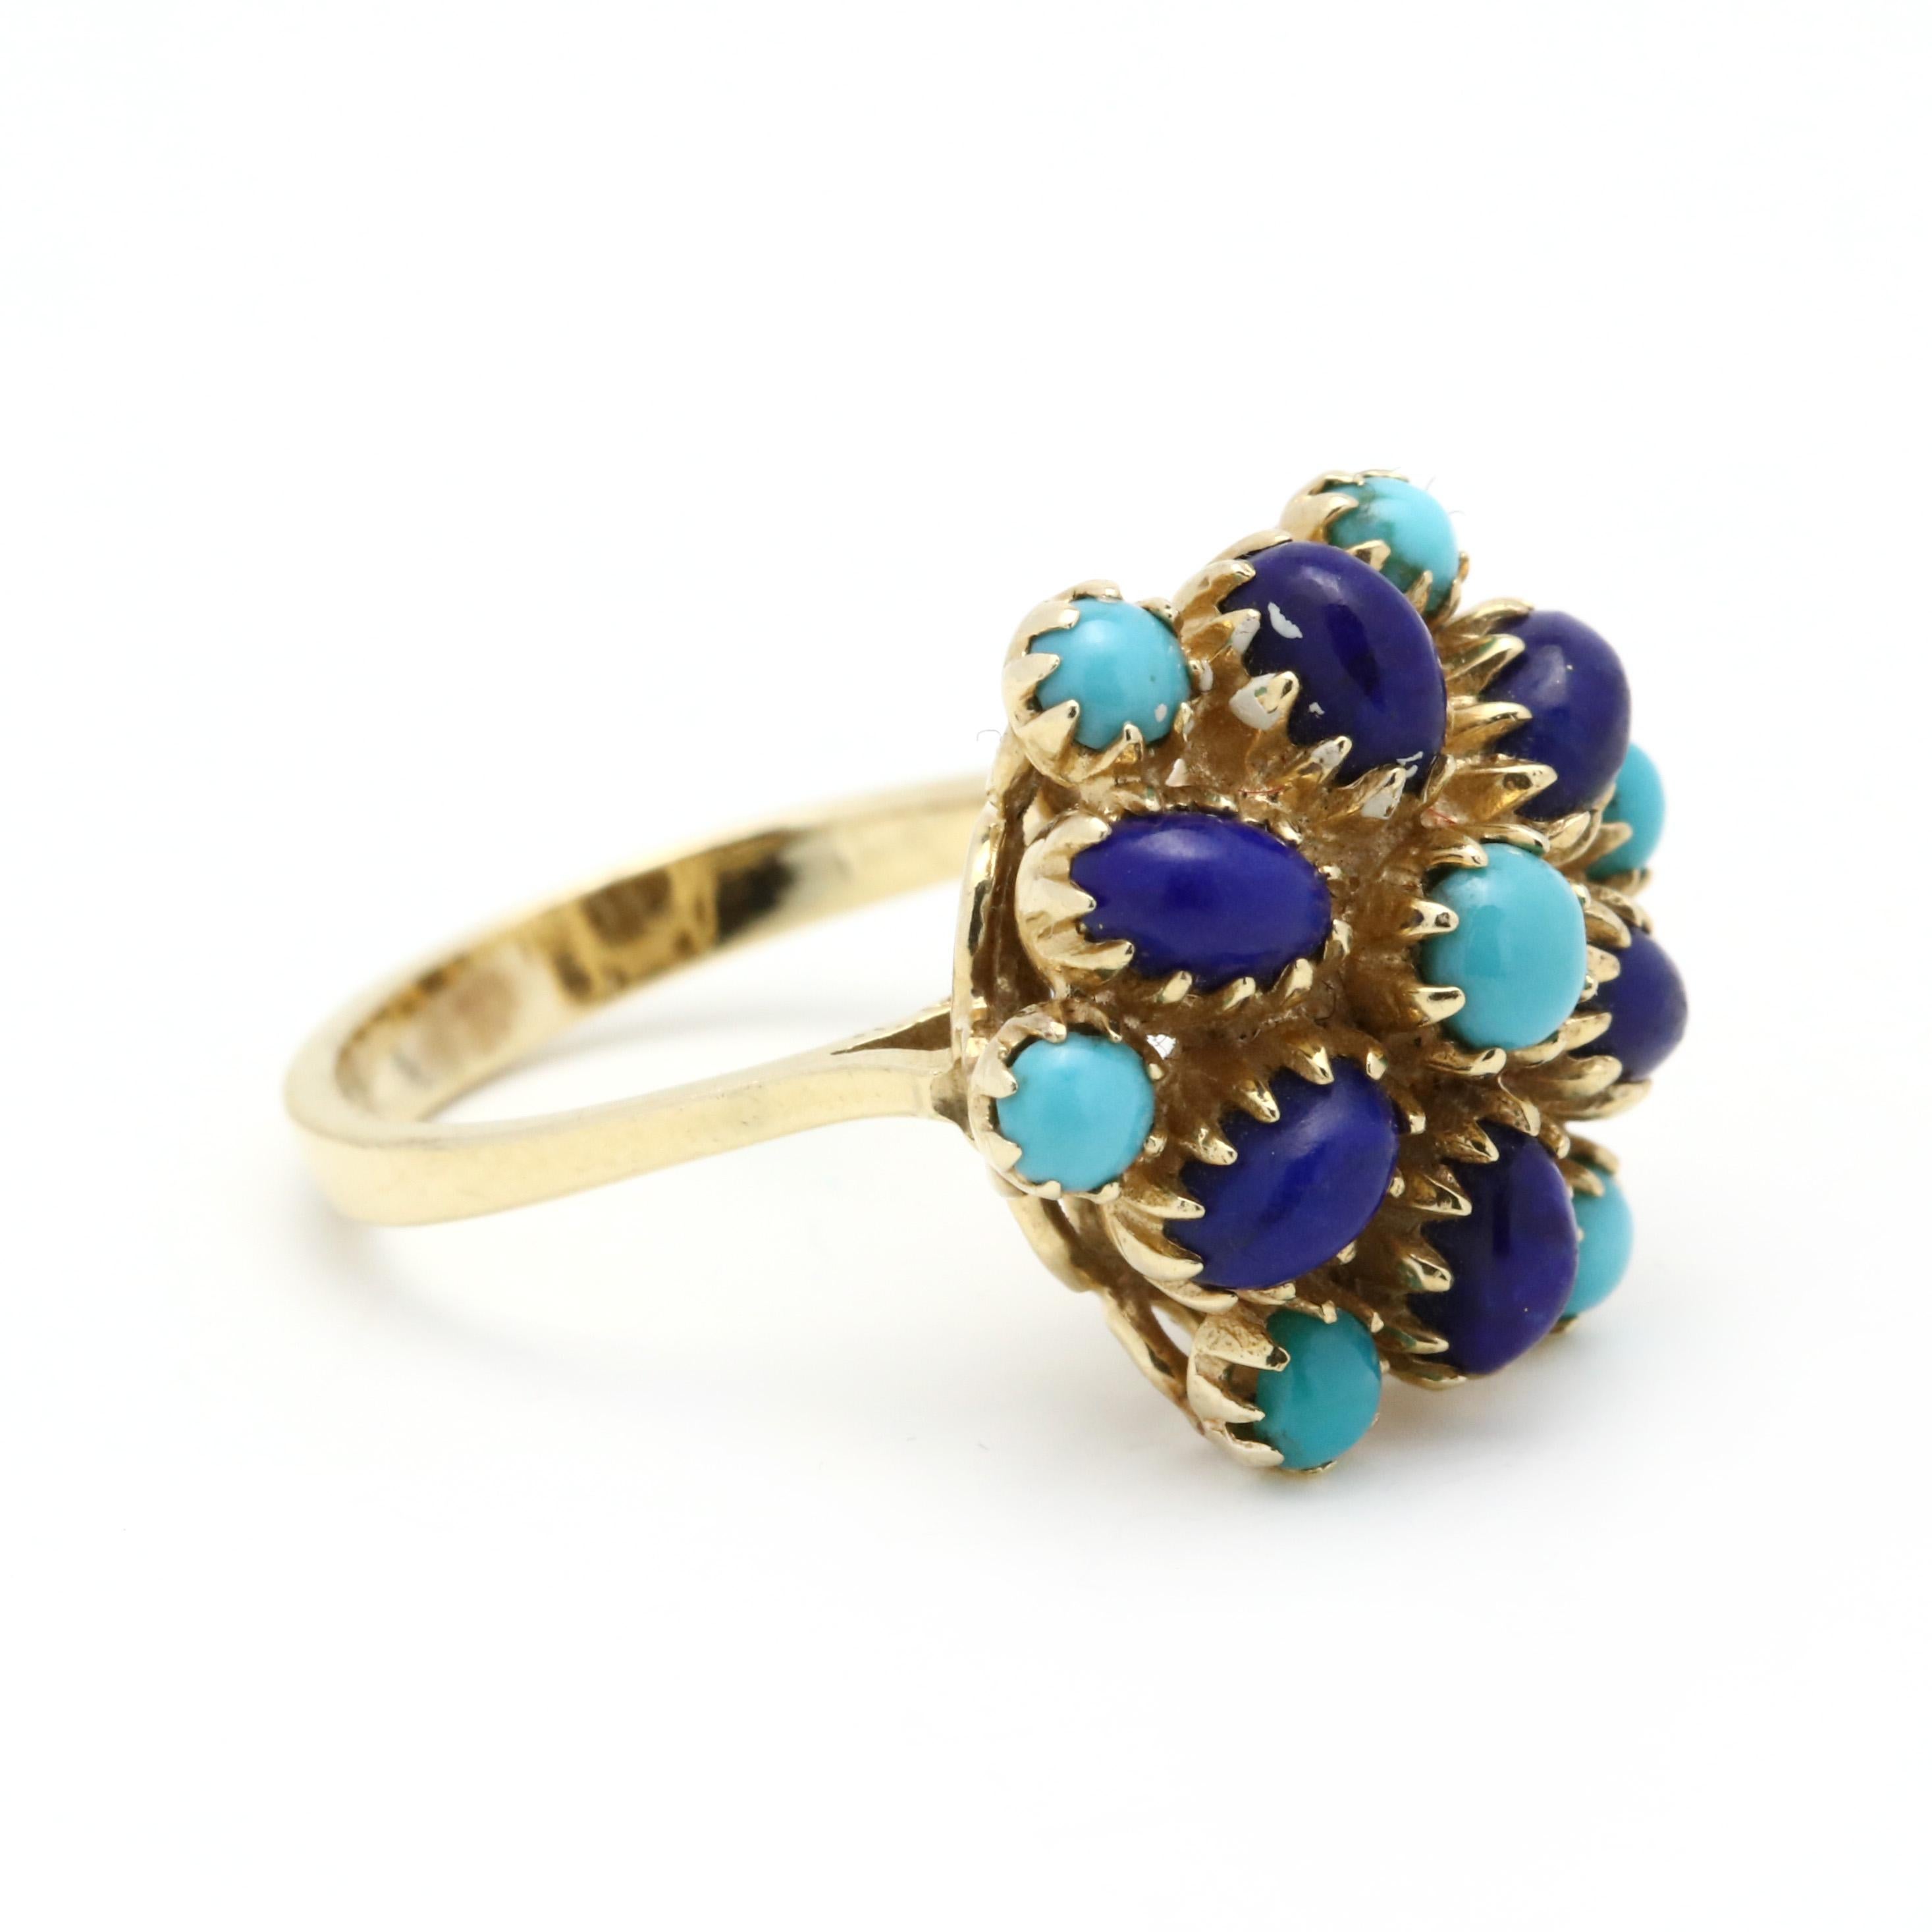 A vintage 14 karat yellow gold turquoise and lapis ring. A cluster star motif with round cabochon cut turquoise and oval cabochon cut lapis stones.

Stones:
- turquoise
- round cabochon cut, 7 stones
- 3 - 3.5 mm

- lapis
- oval cabochon, 6 stones
-